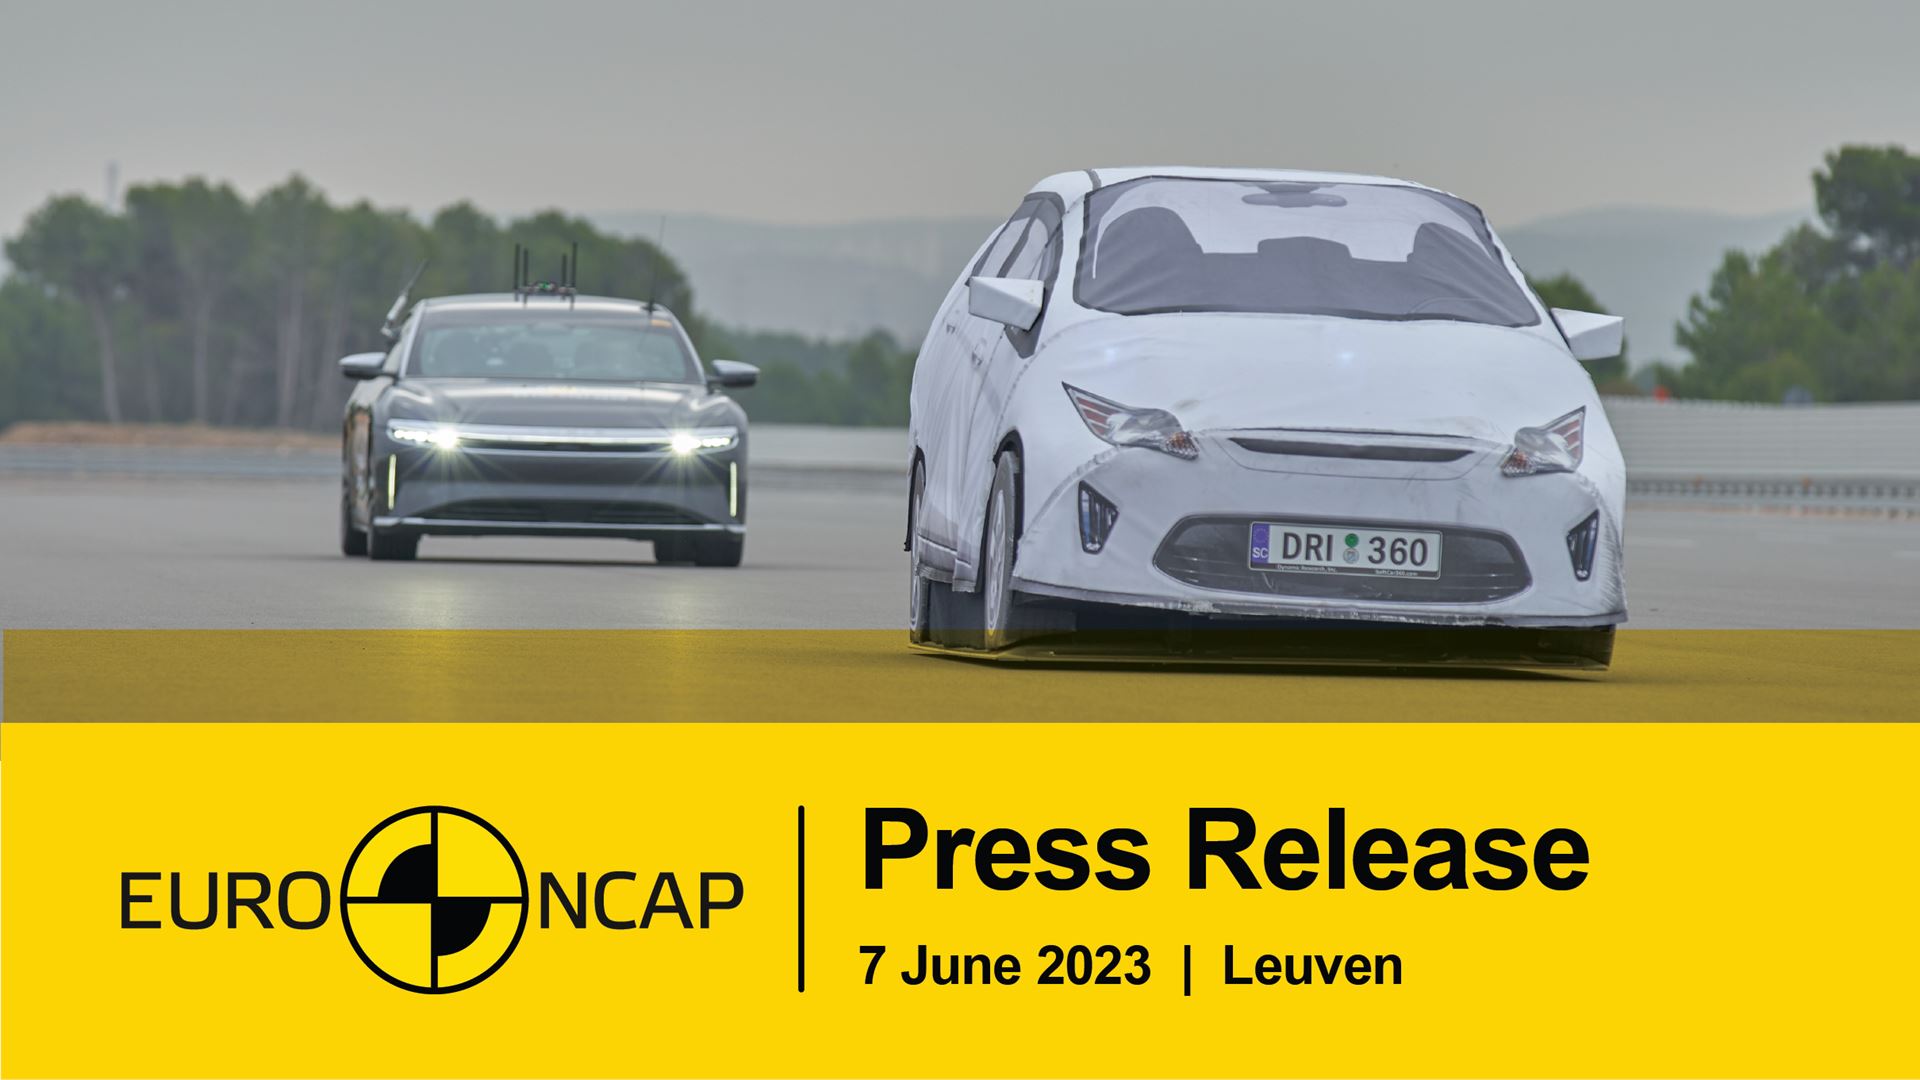 Euro NCAP to Launch New Assisted Driving Results